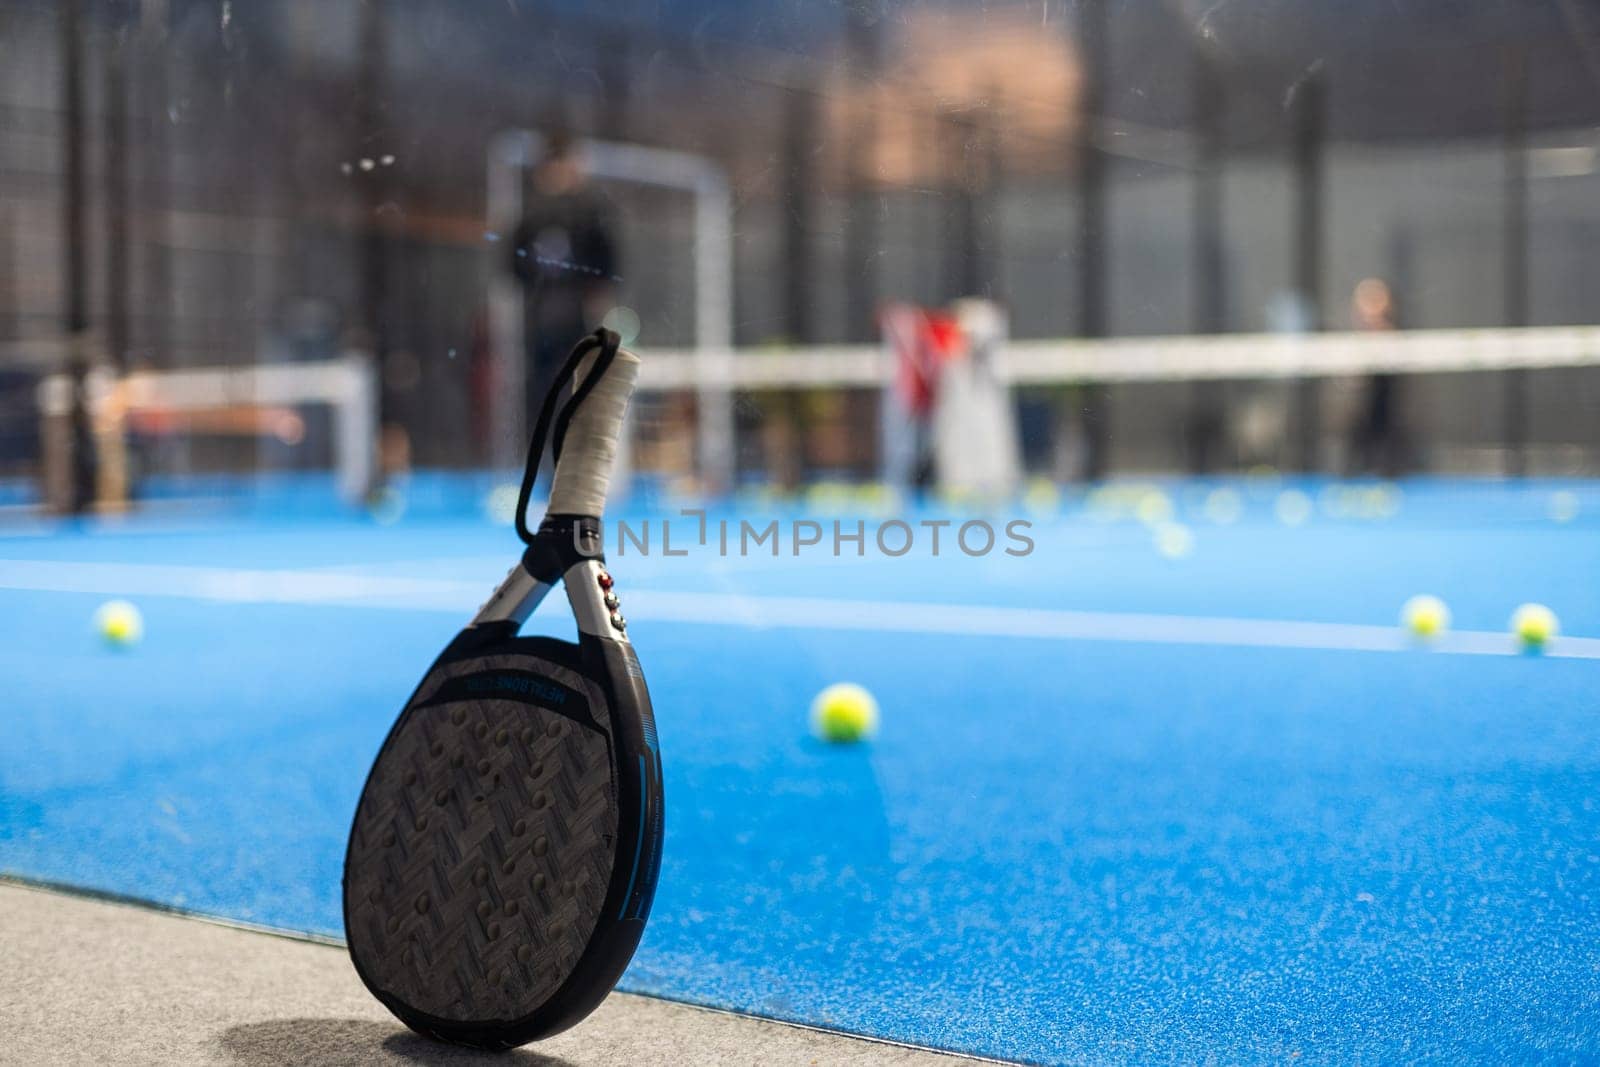 Paddle tennis: Paddel racket and ball in front of an outdoor court by Andelov13